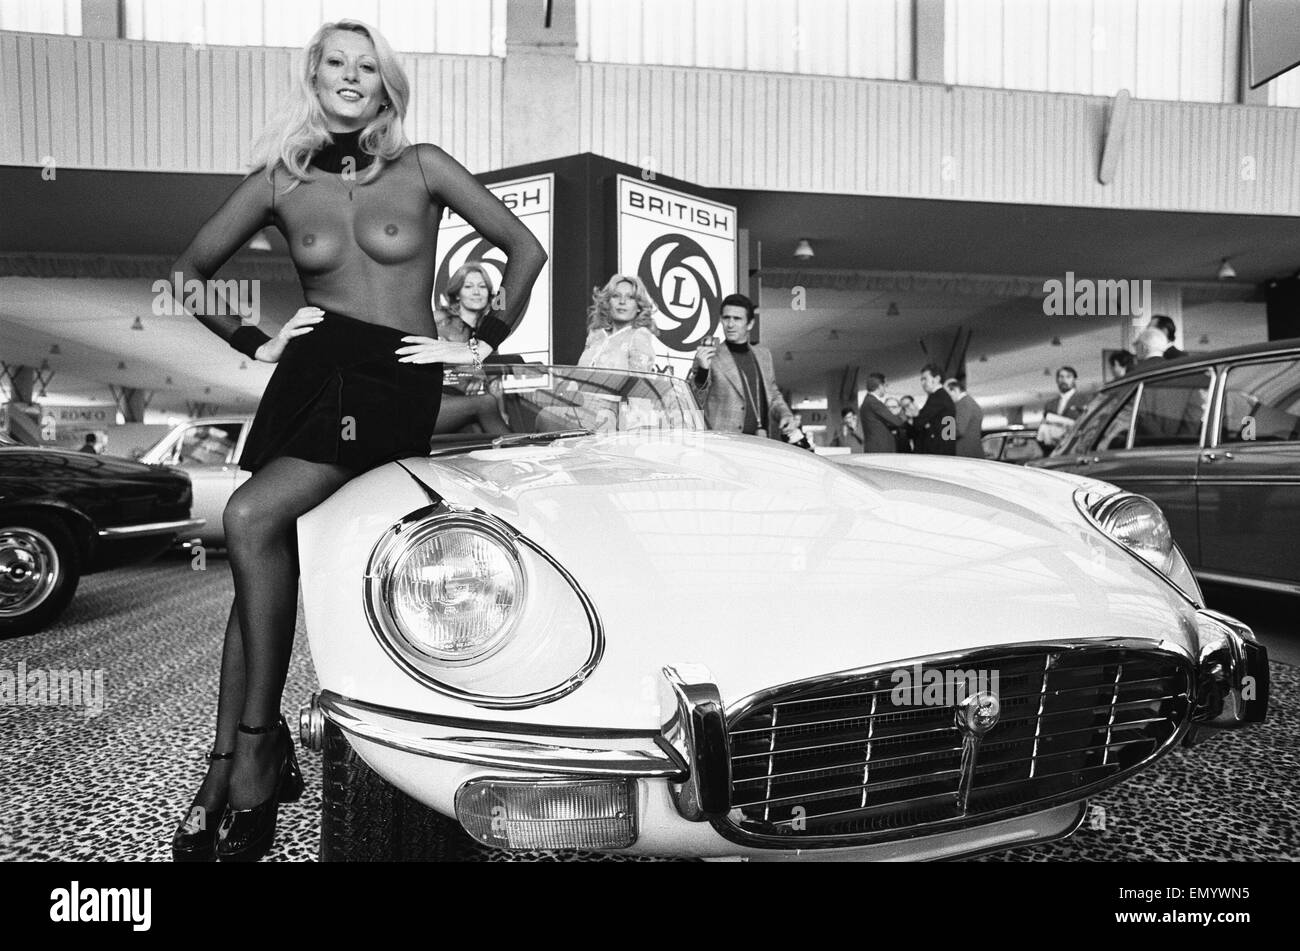 General scenes from the 1972 Paris motor show 6th October 1972 Stock Photo